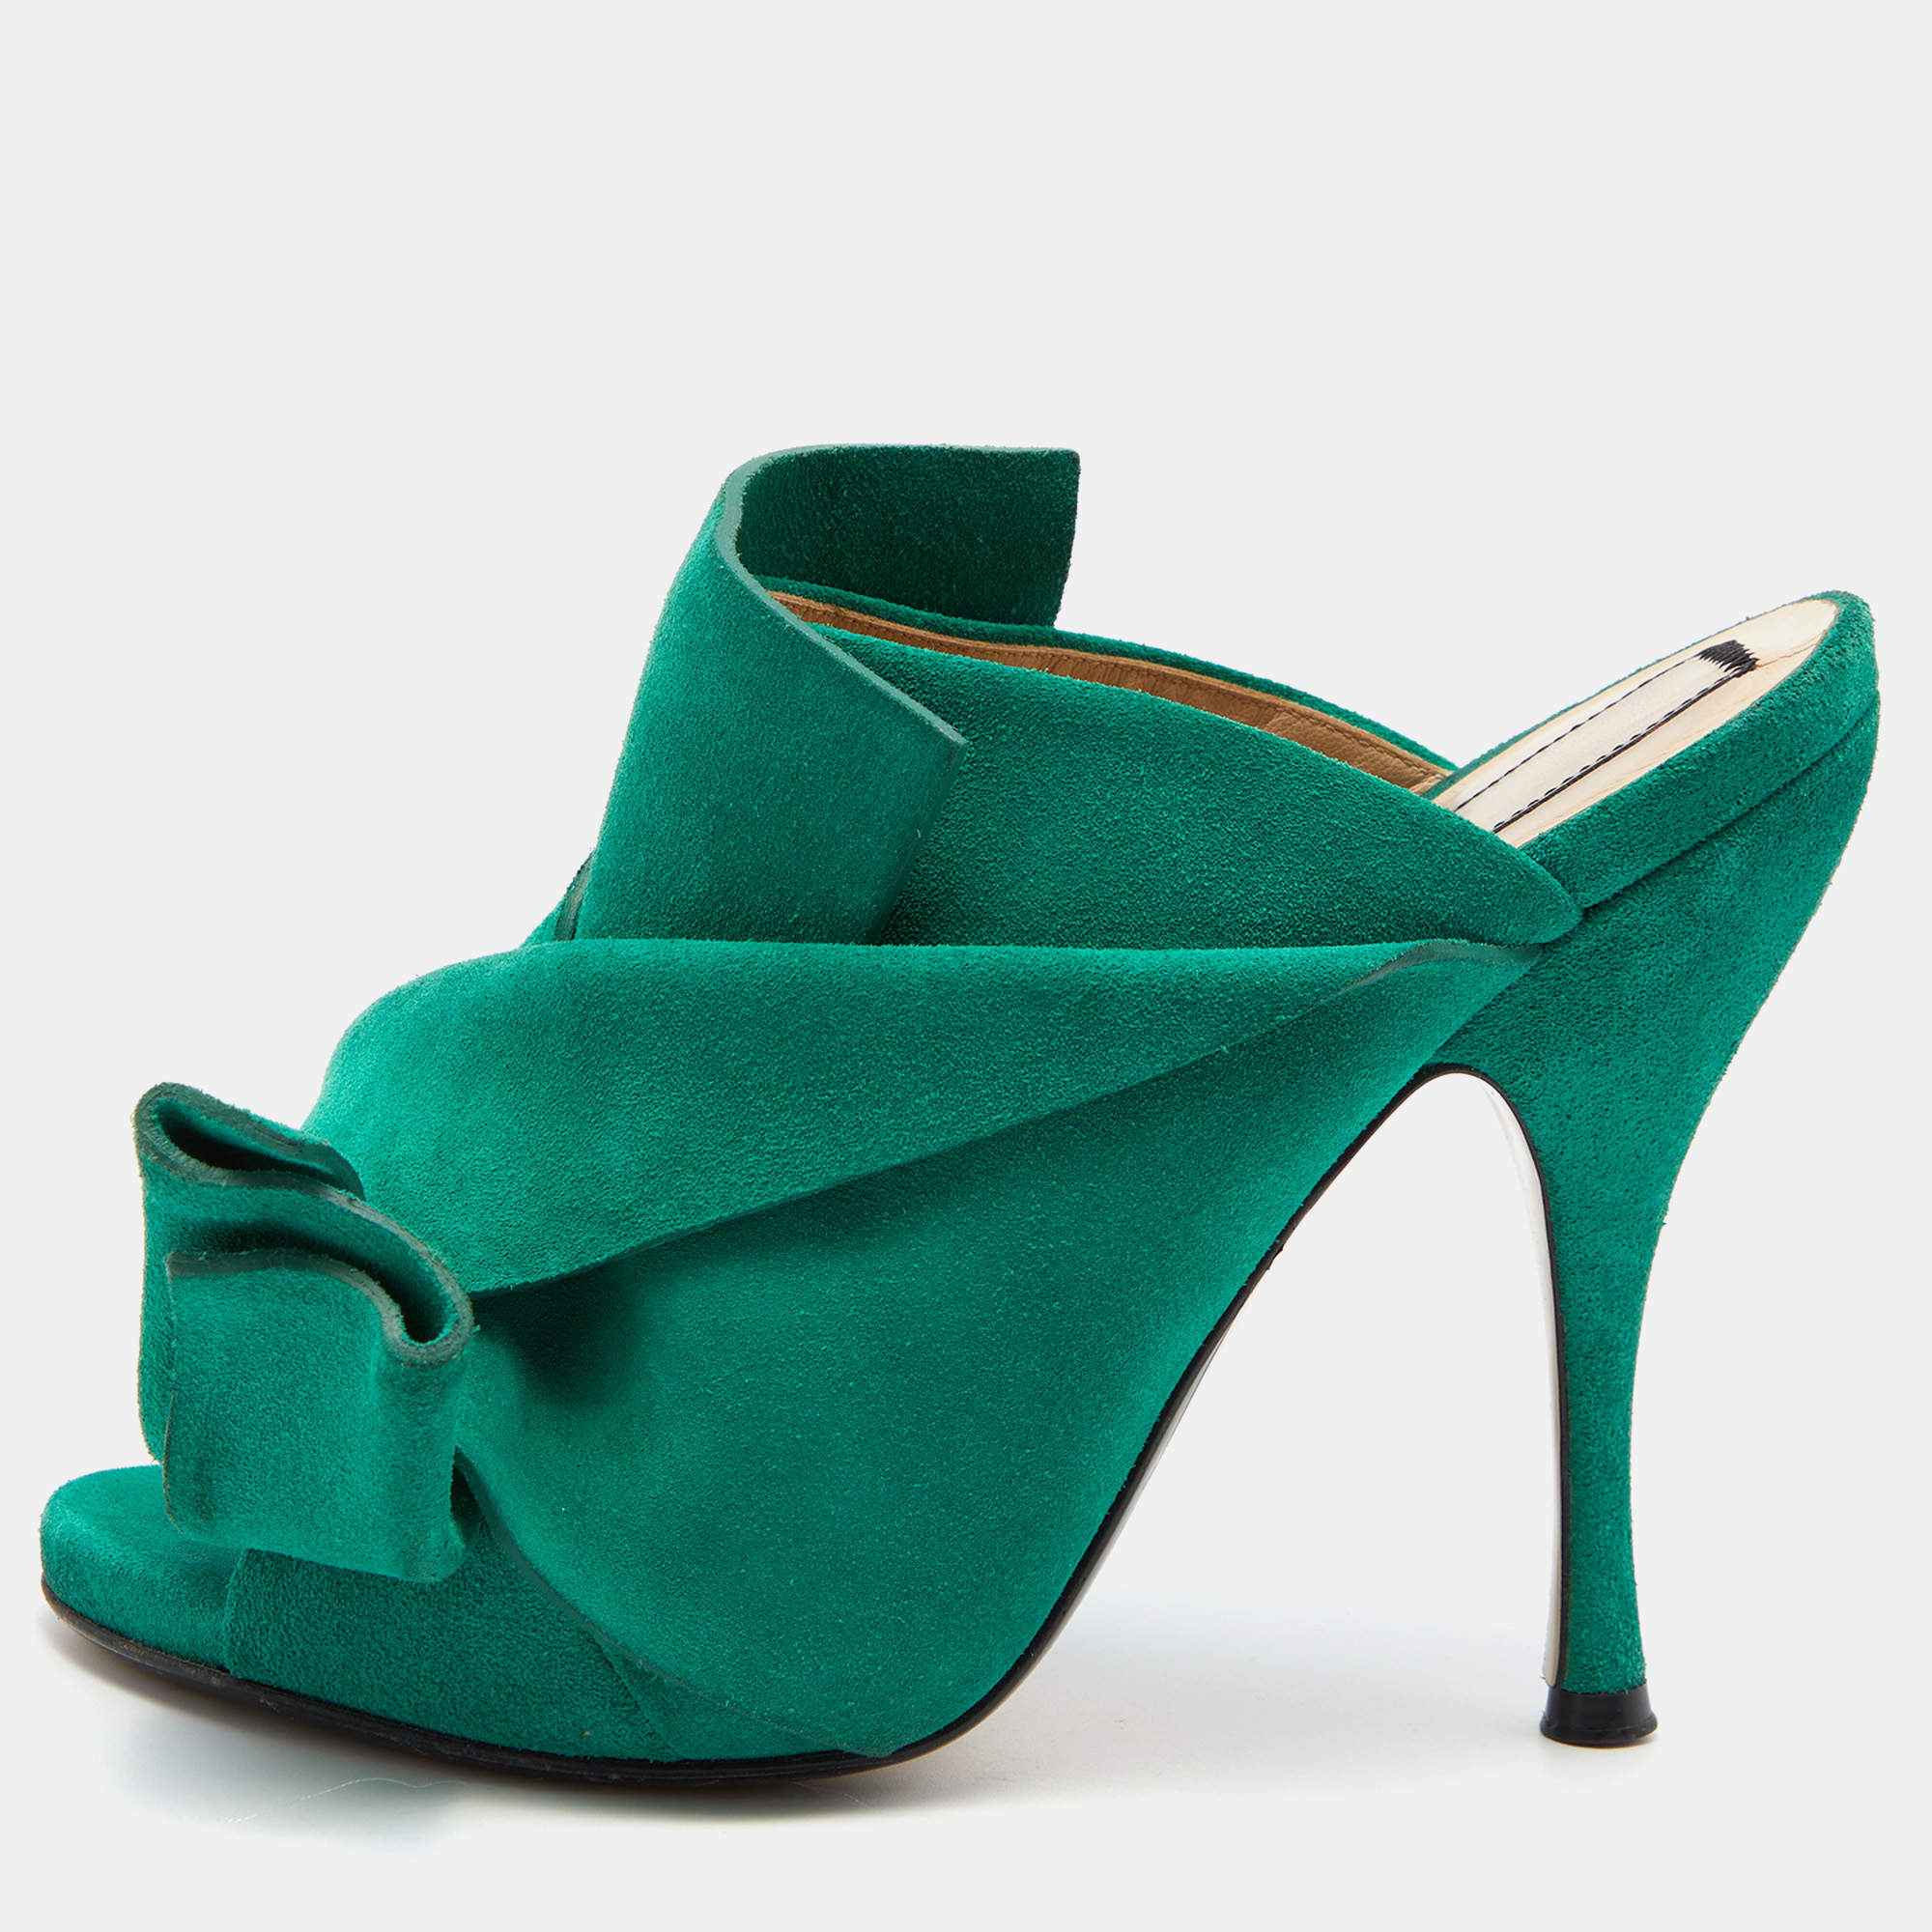 Nº21 Green Suede Raso Knotted Mules Size 37